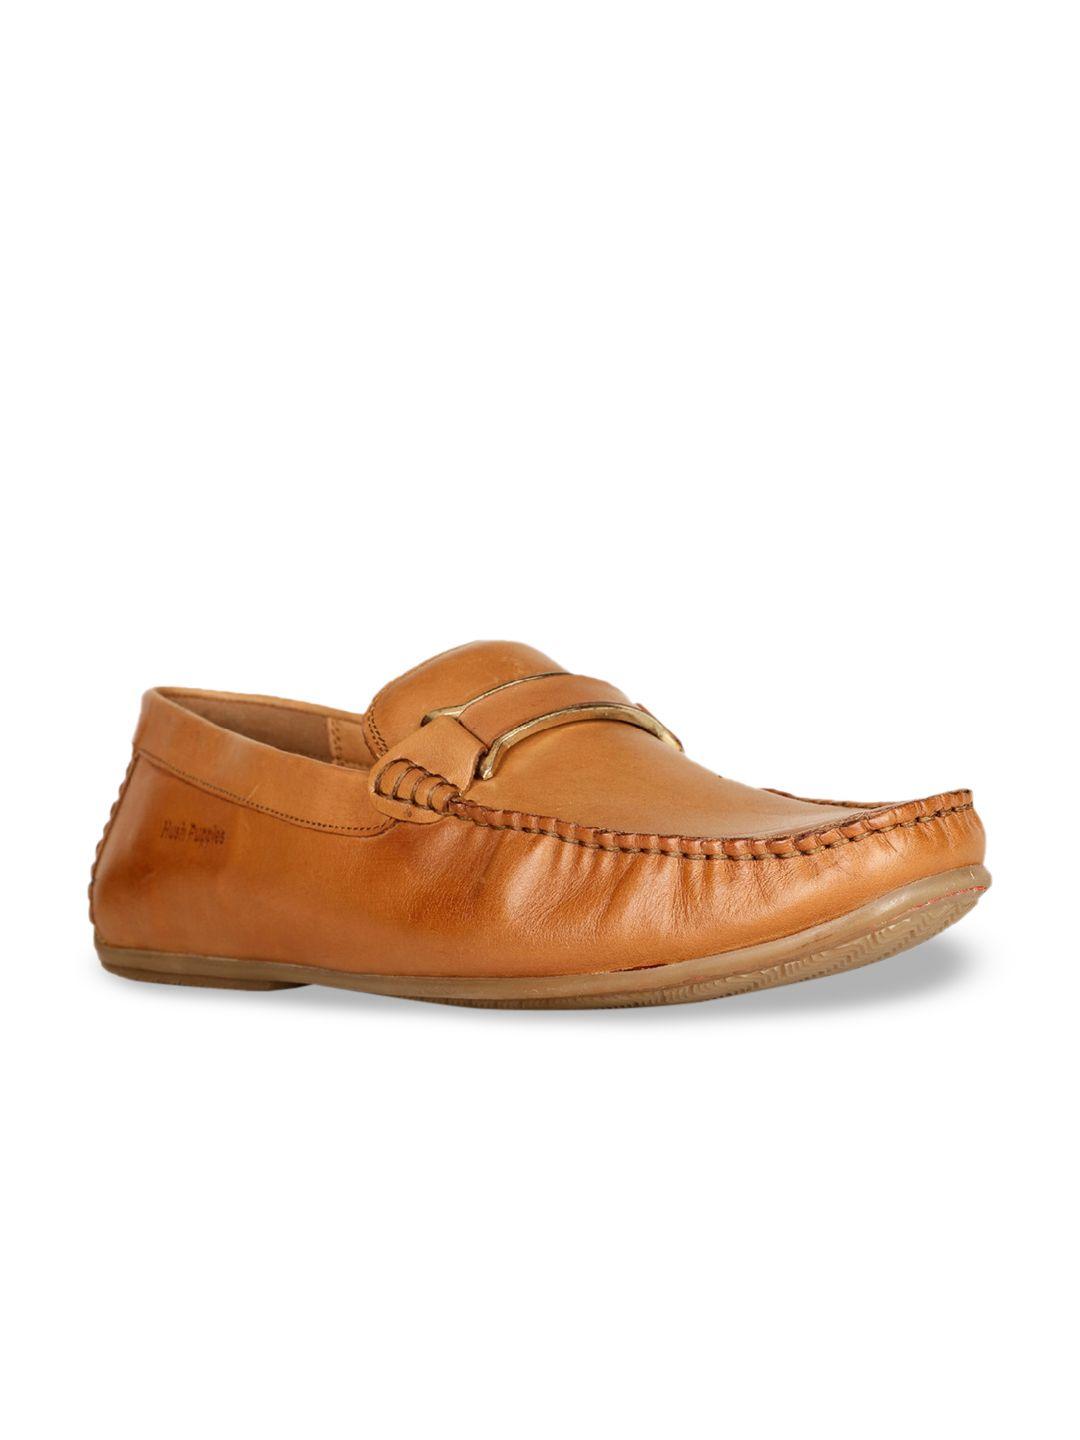 hush puppies men leather comfort insole penny loafers